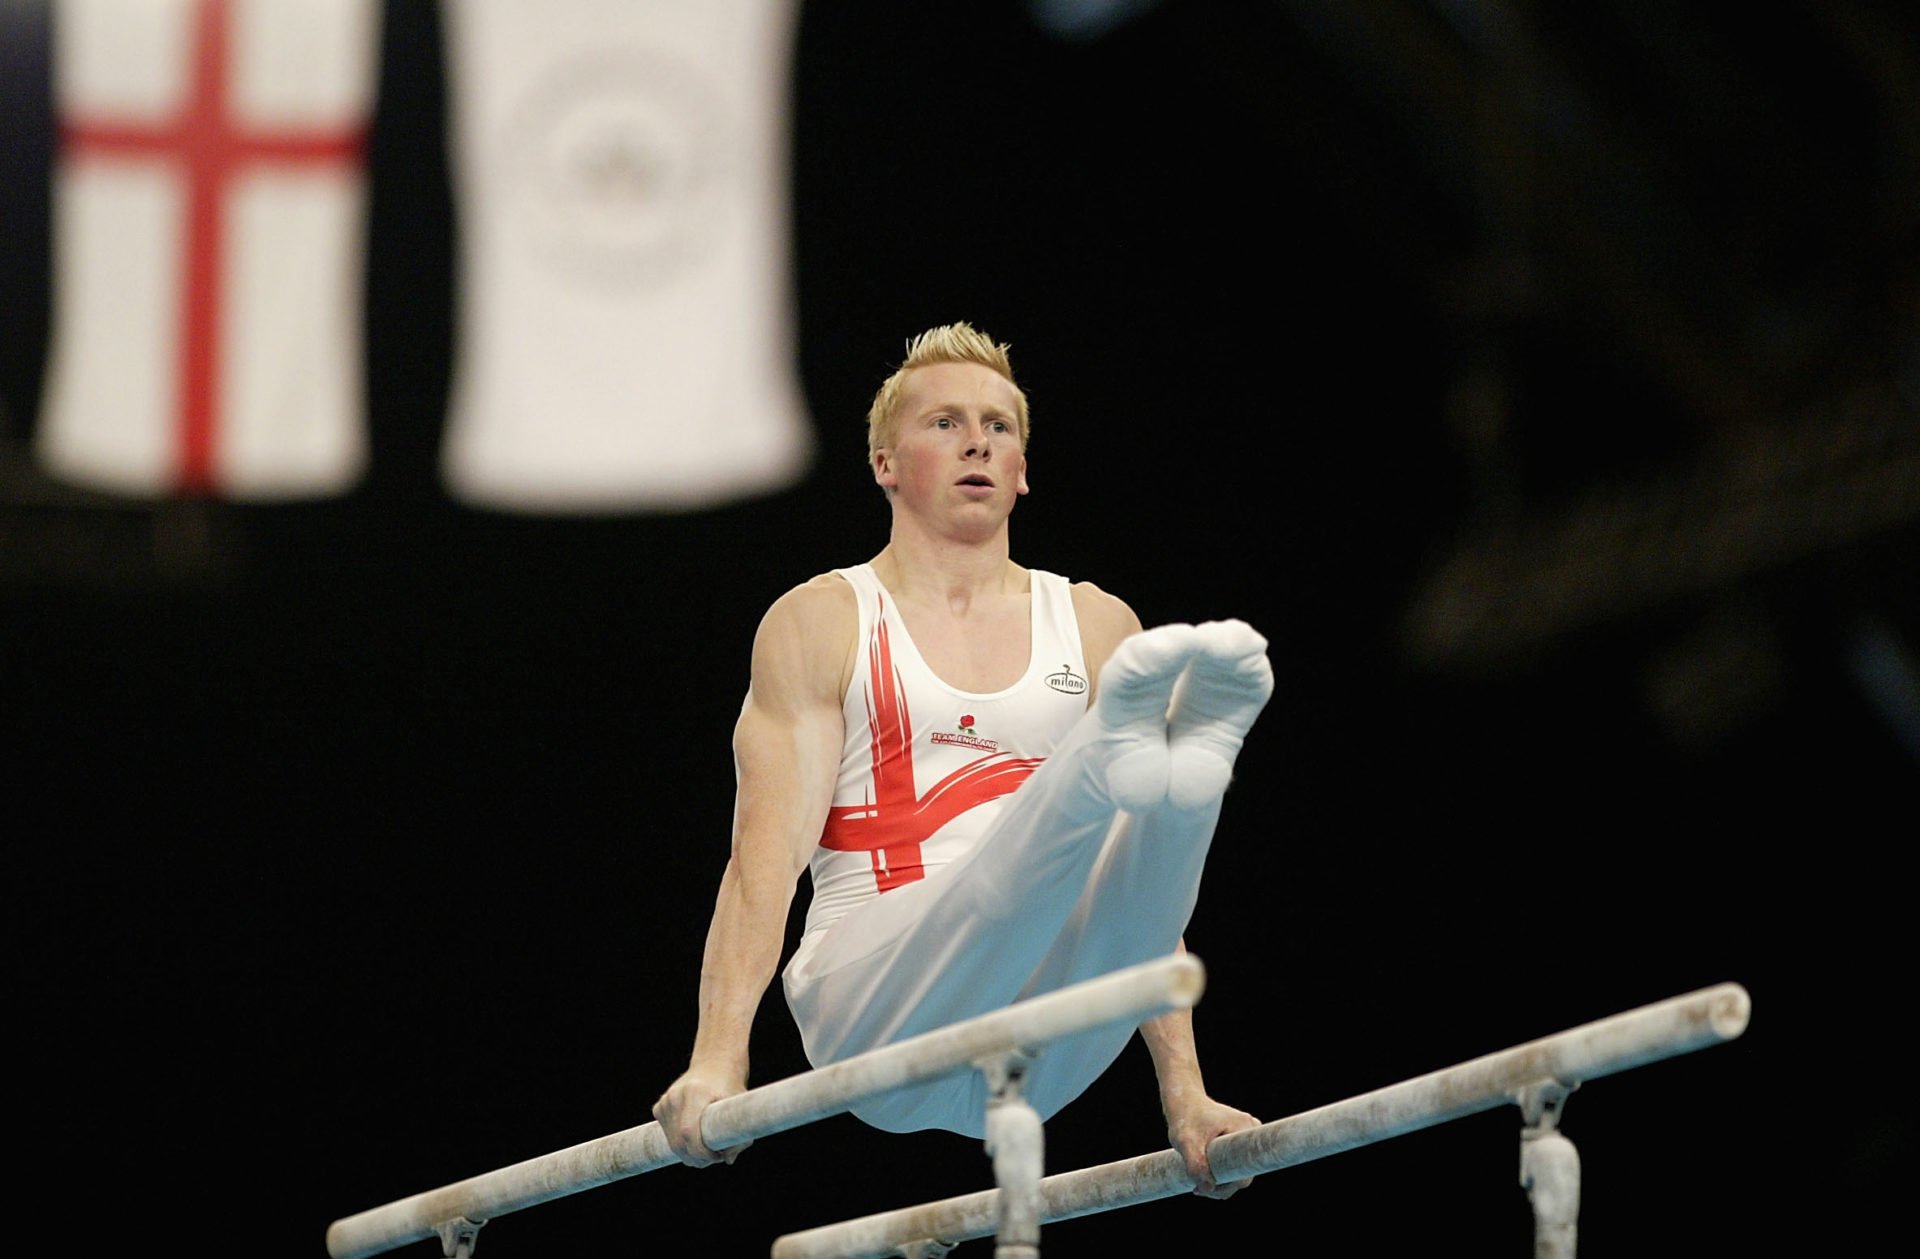  Craig Heap of England in action on the parallel bars during the Mens Individual All-Round Gymnastics Final...